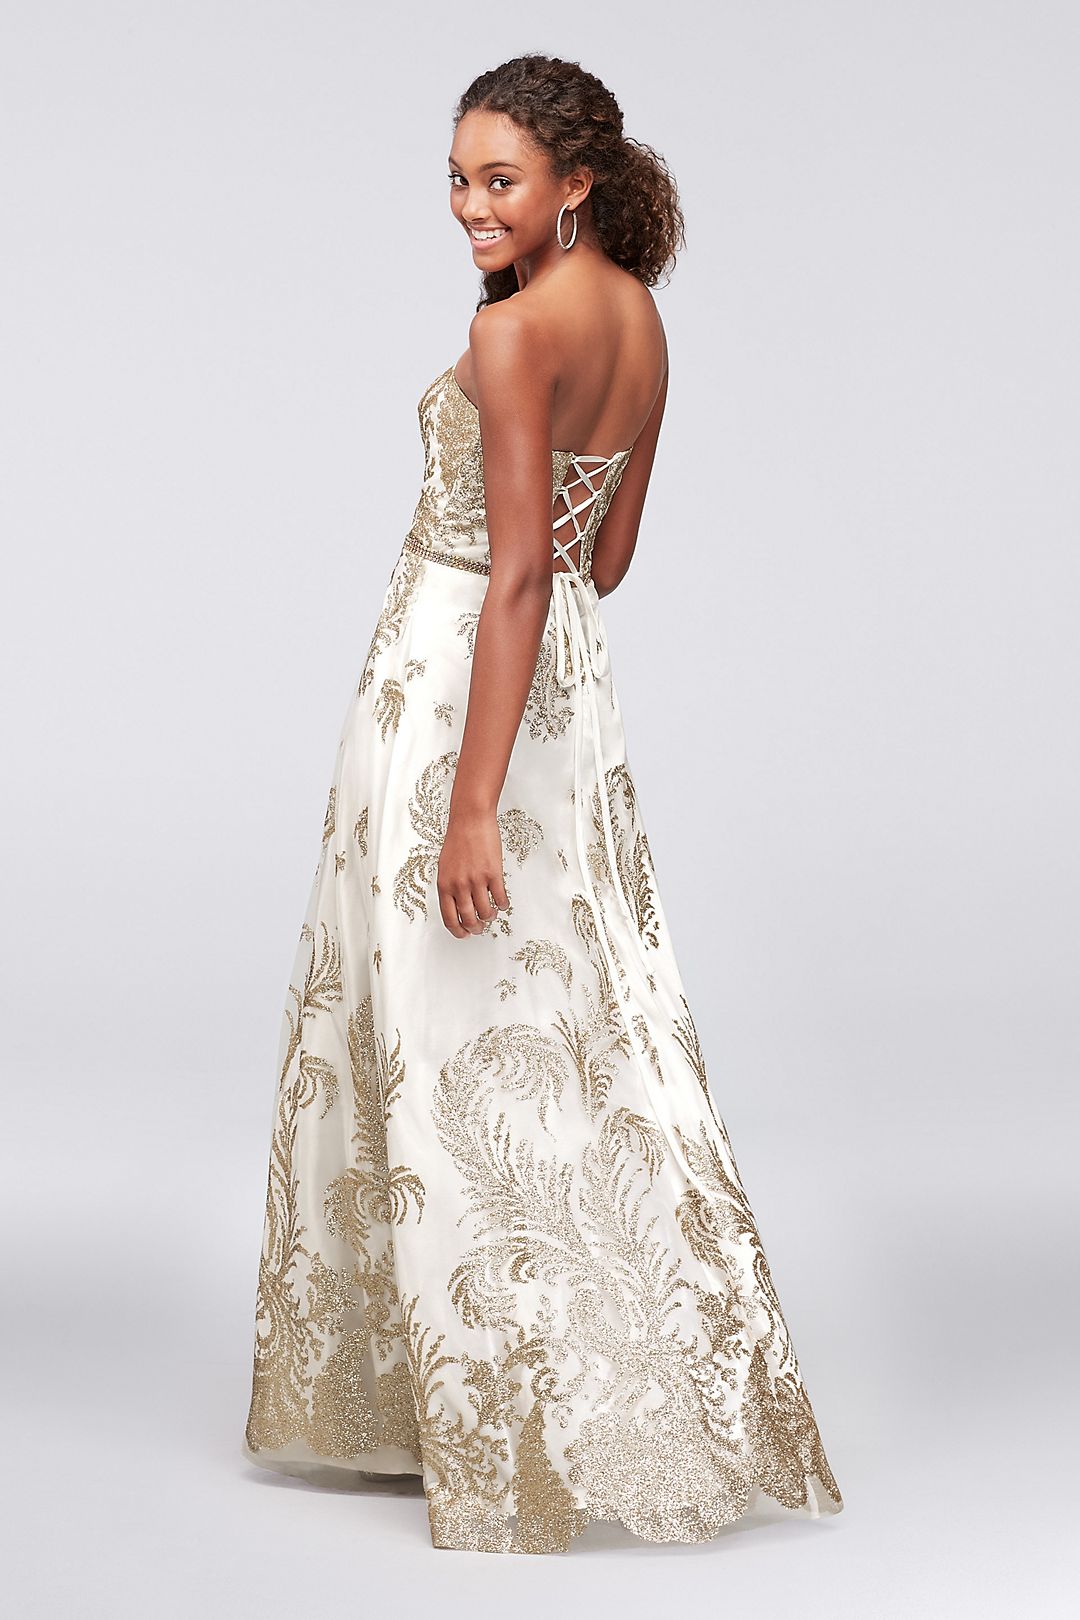 Strapless Glitter Brocade Gown with Crystal Belt Image 2